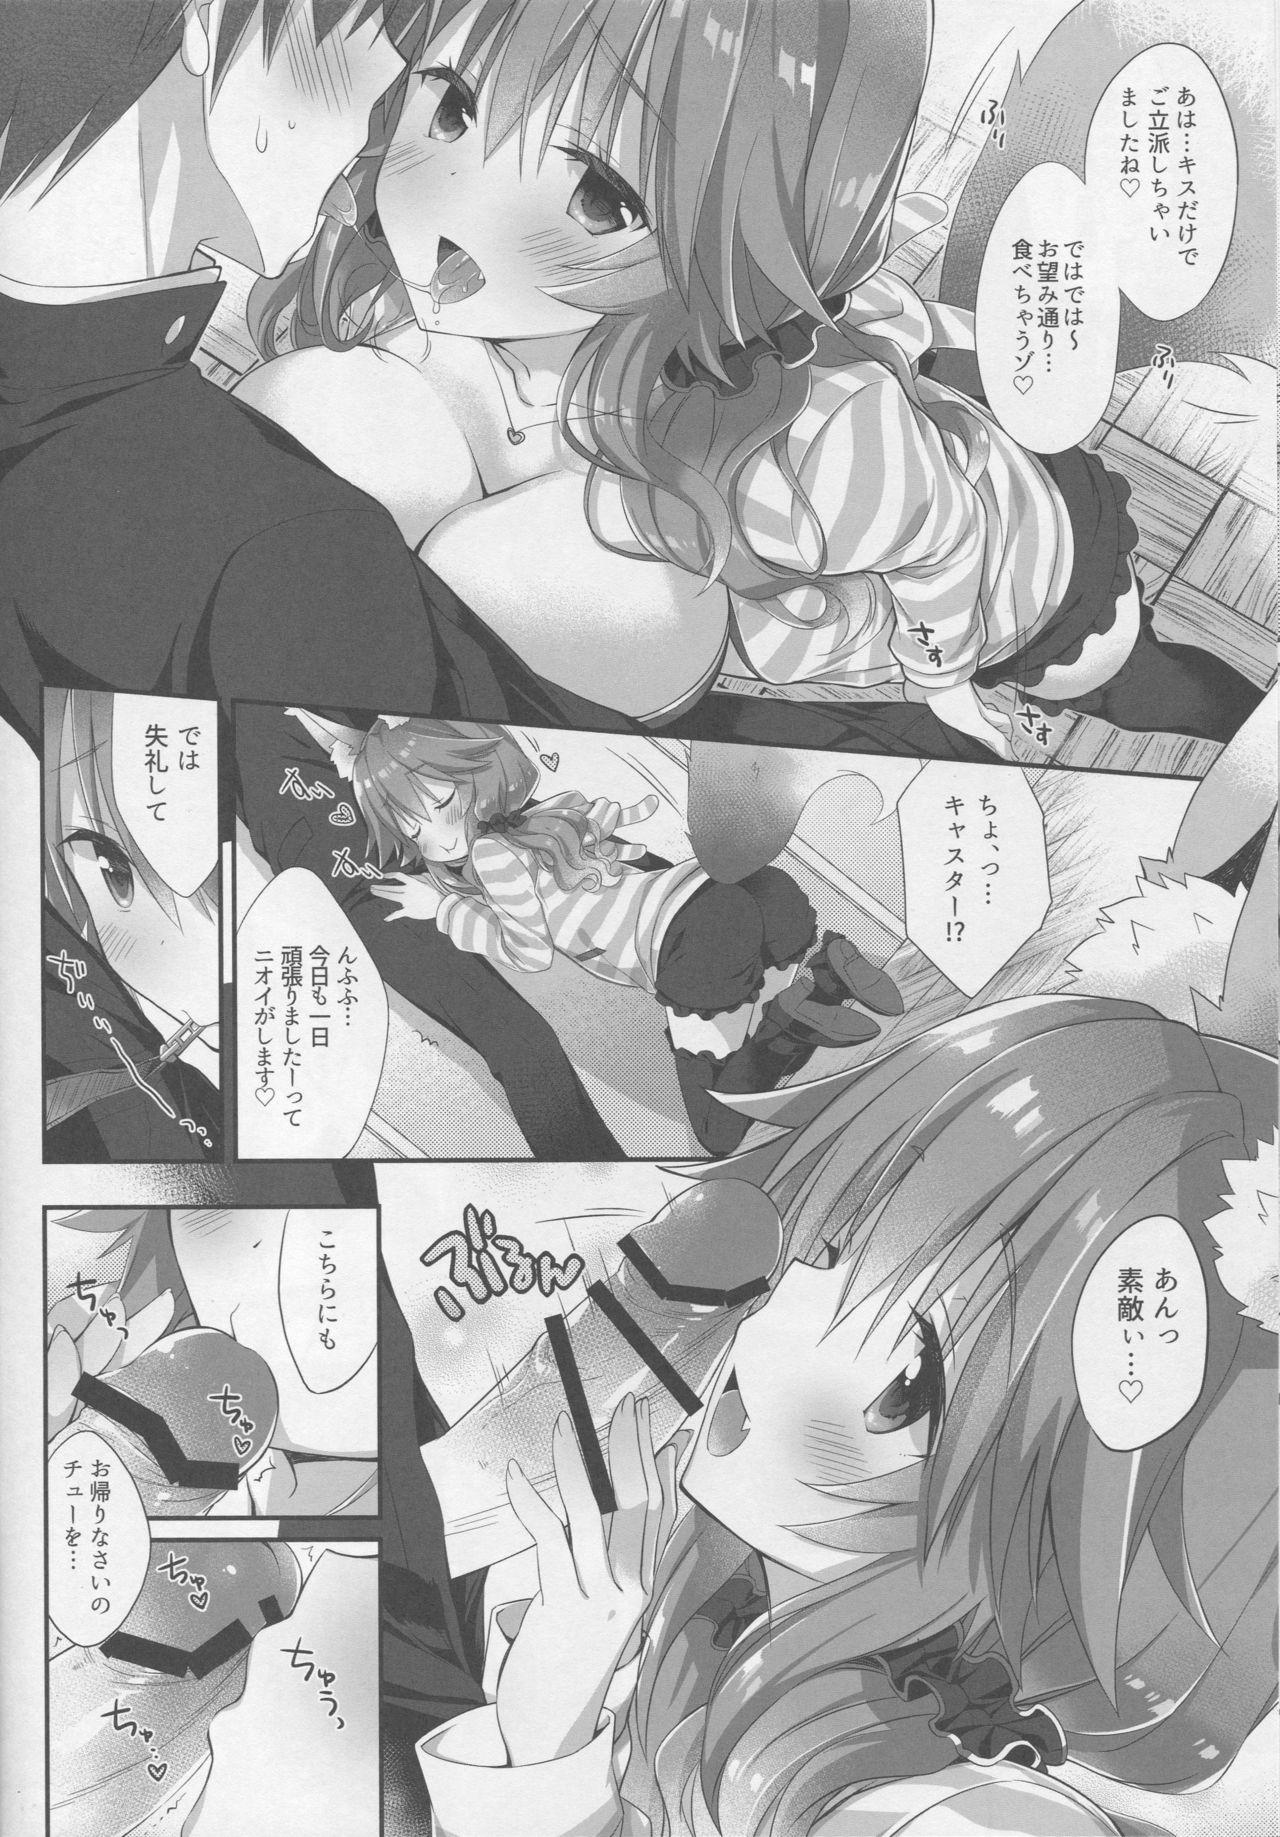 Spy Cam Ore to Tamamo to My Room 2 - Fate extra Real Amateur Porn - Page 7